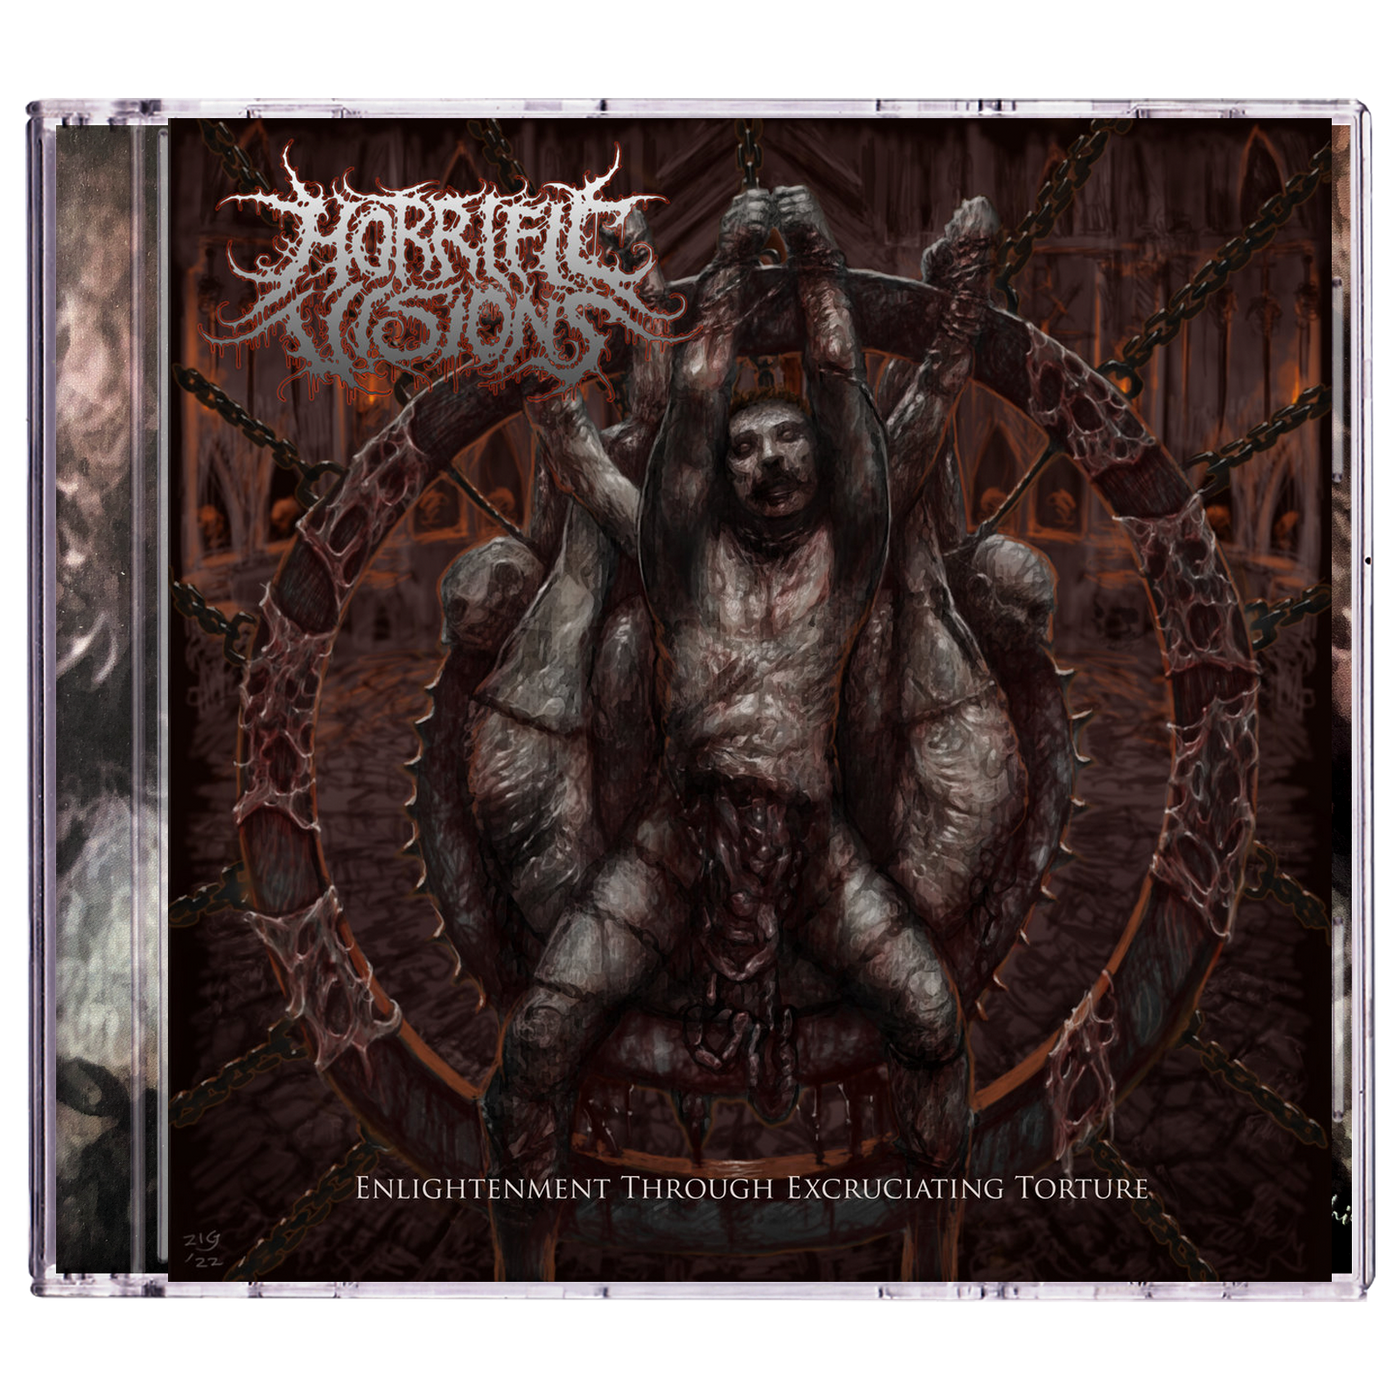 Horrific Visions 'Enlightenment Through Excruciating Torture' CD